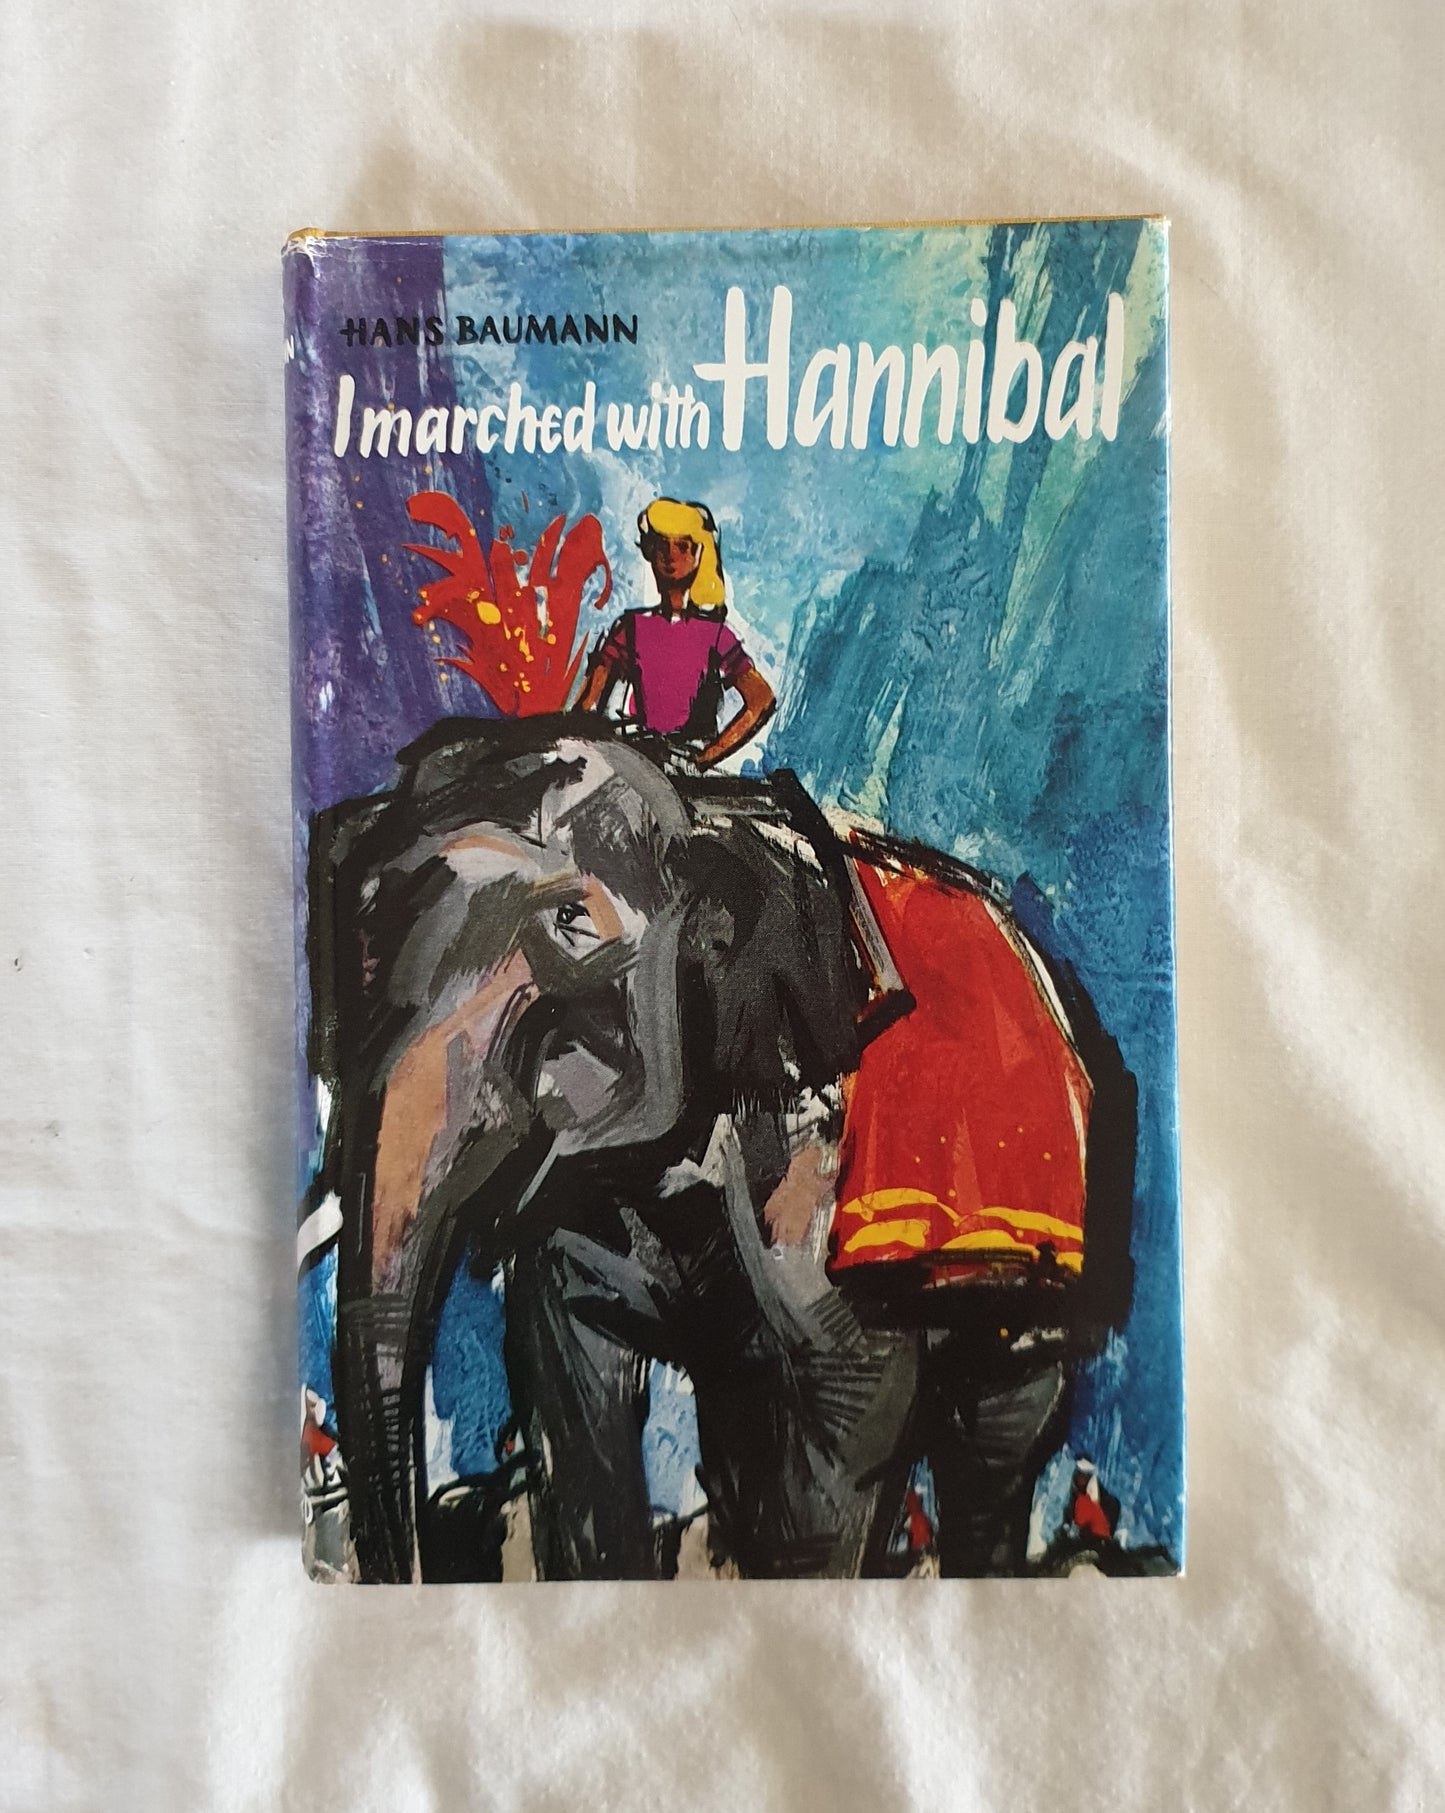 I Marched With Hannibal by Hans Baumann